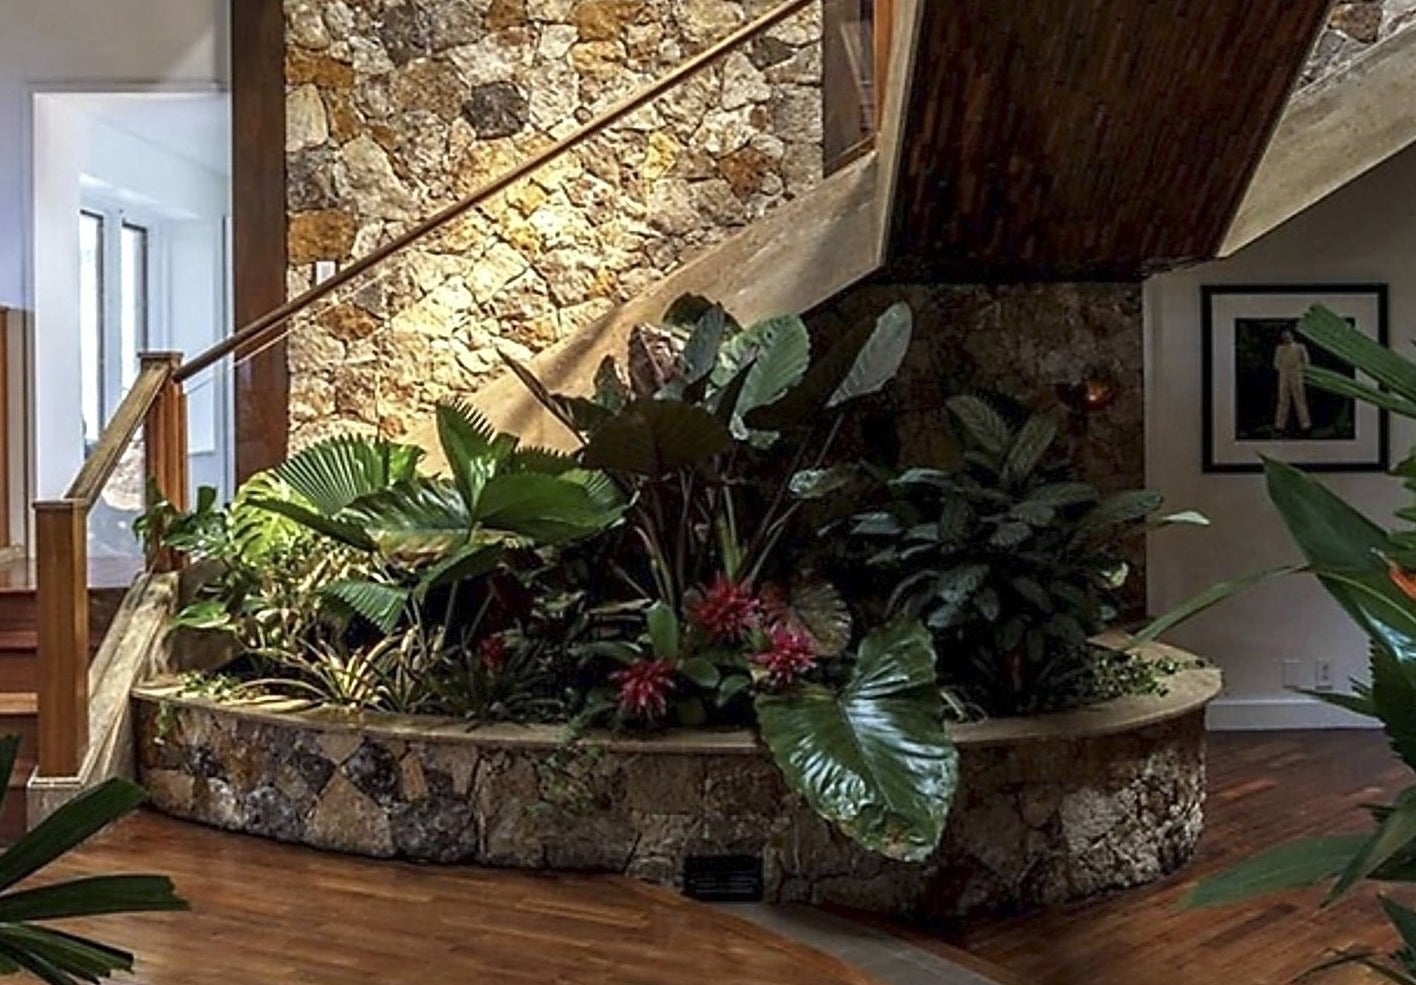 Close-up of plants underneath the staircase